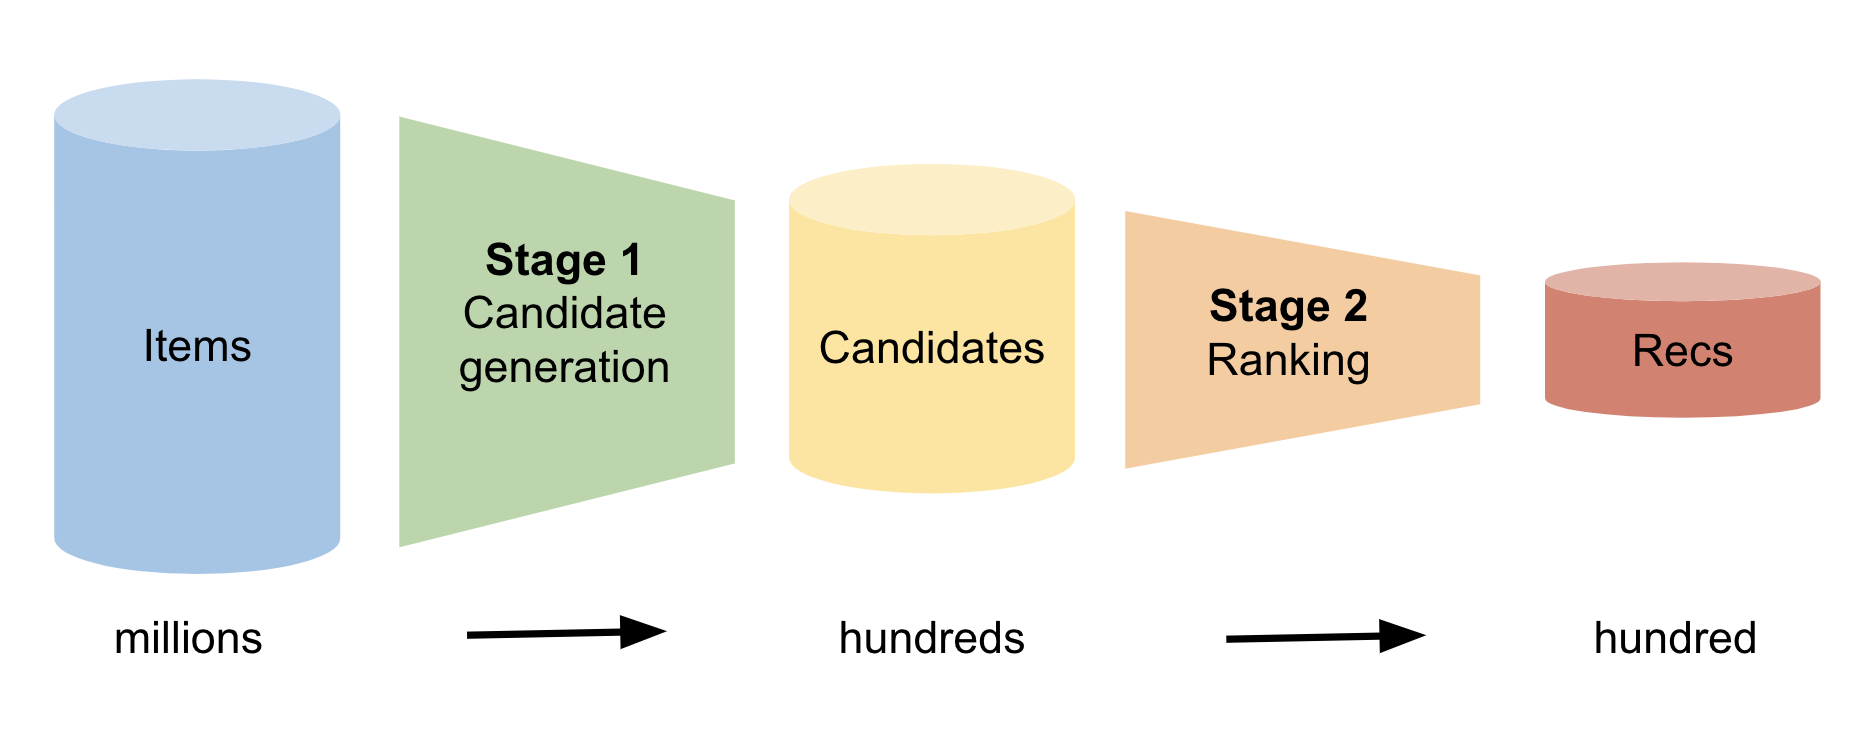 Diagram shows the steps from candidate generation to ranking and the relative pool size.